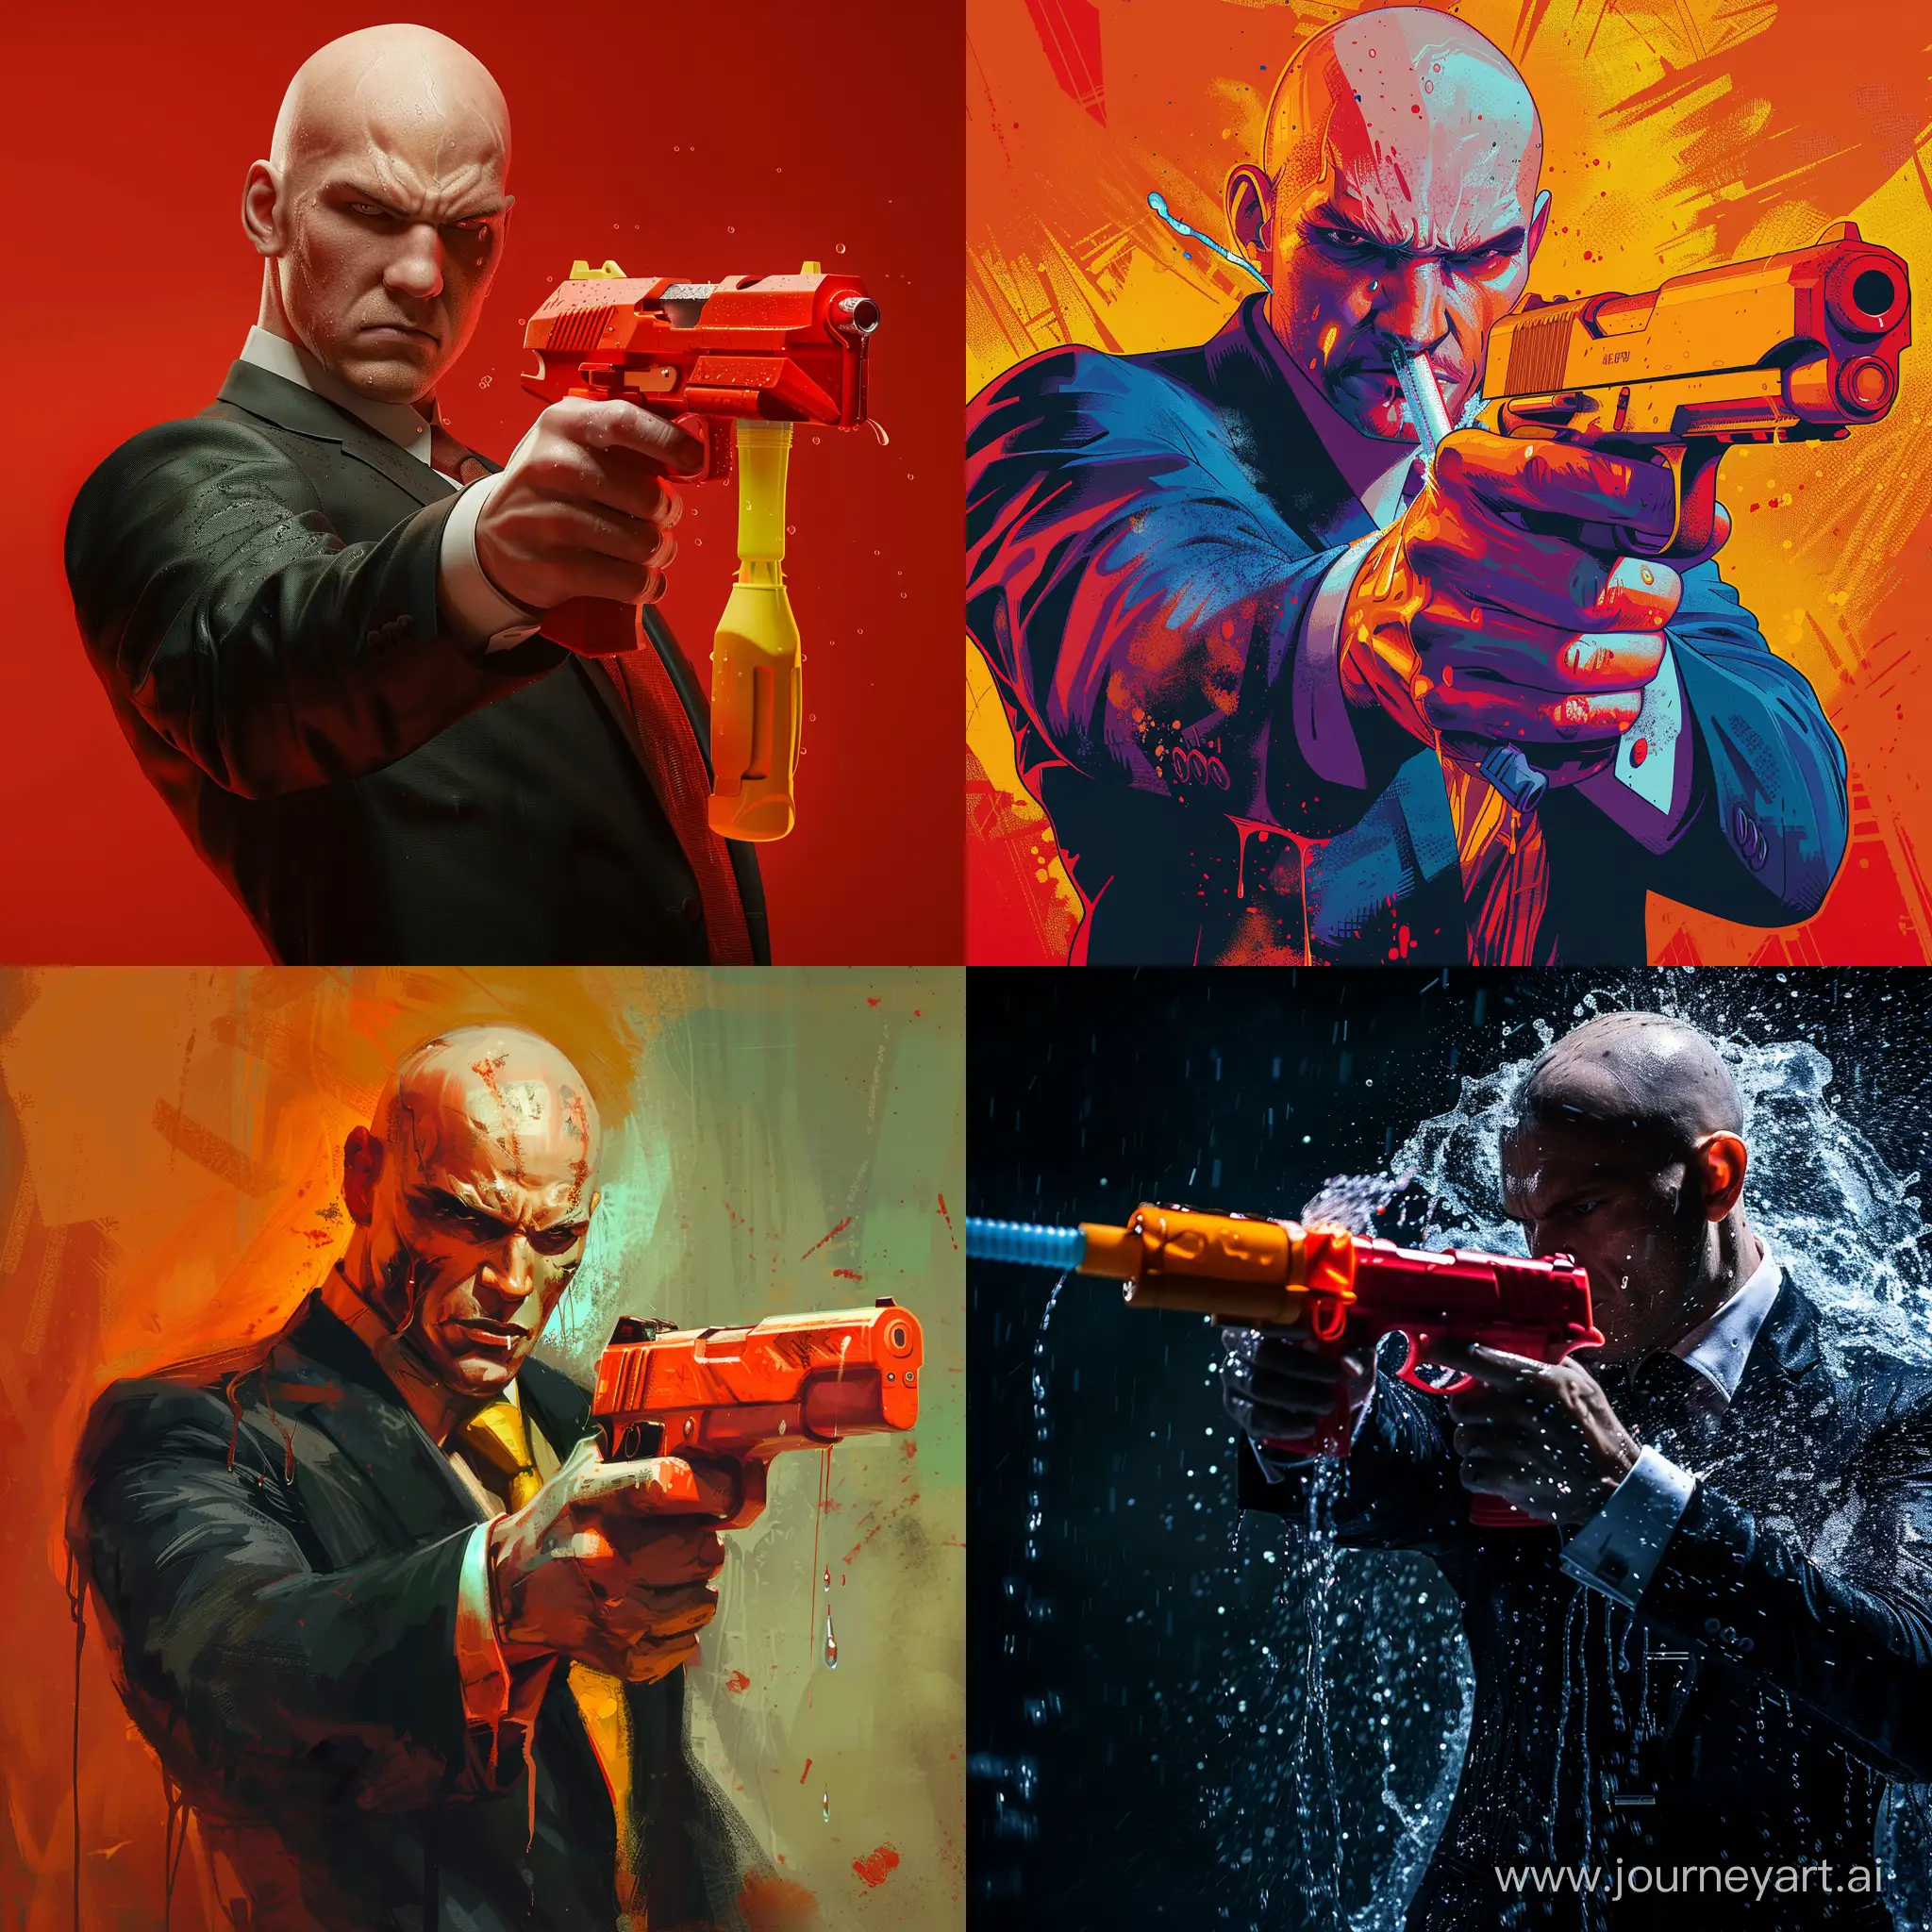 Agent 47 with a squirt gun